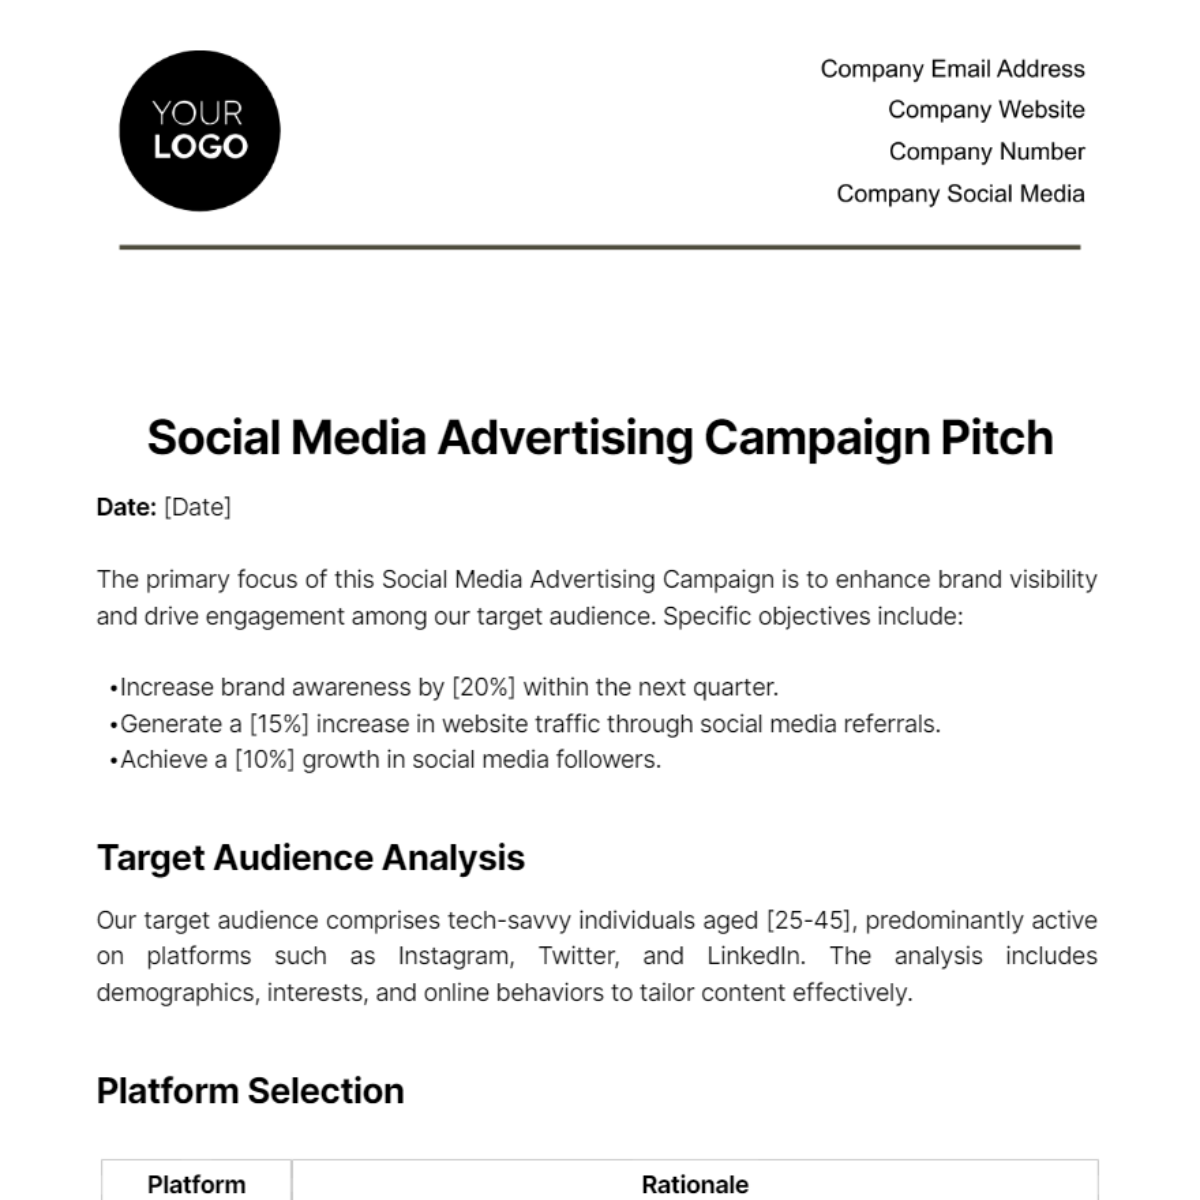 Social Media Advertising Campaign Pitch Template